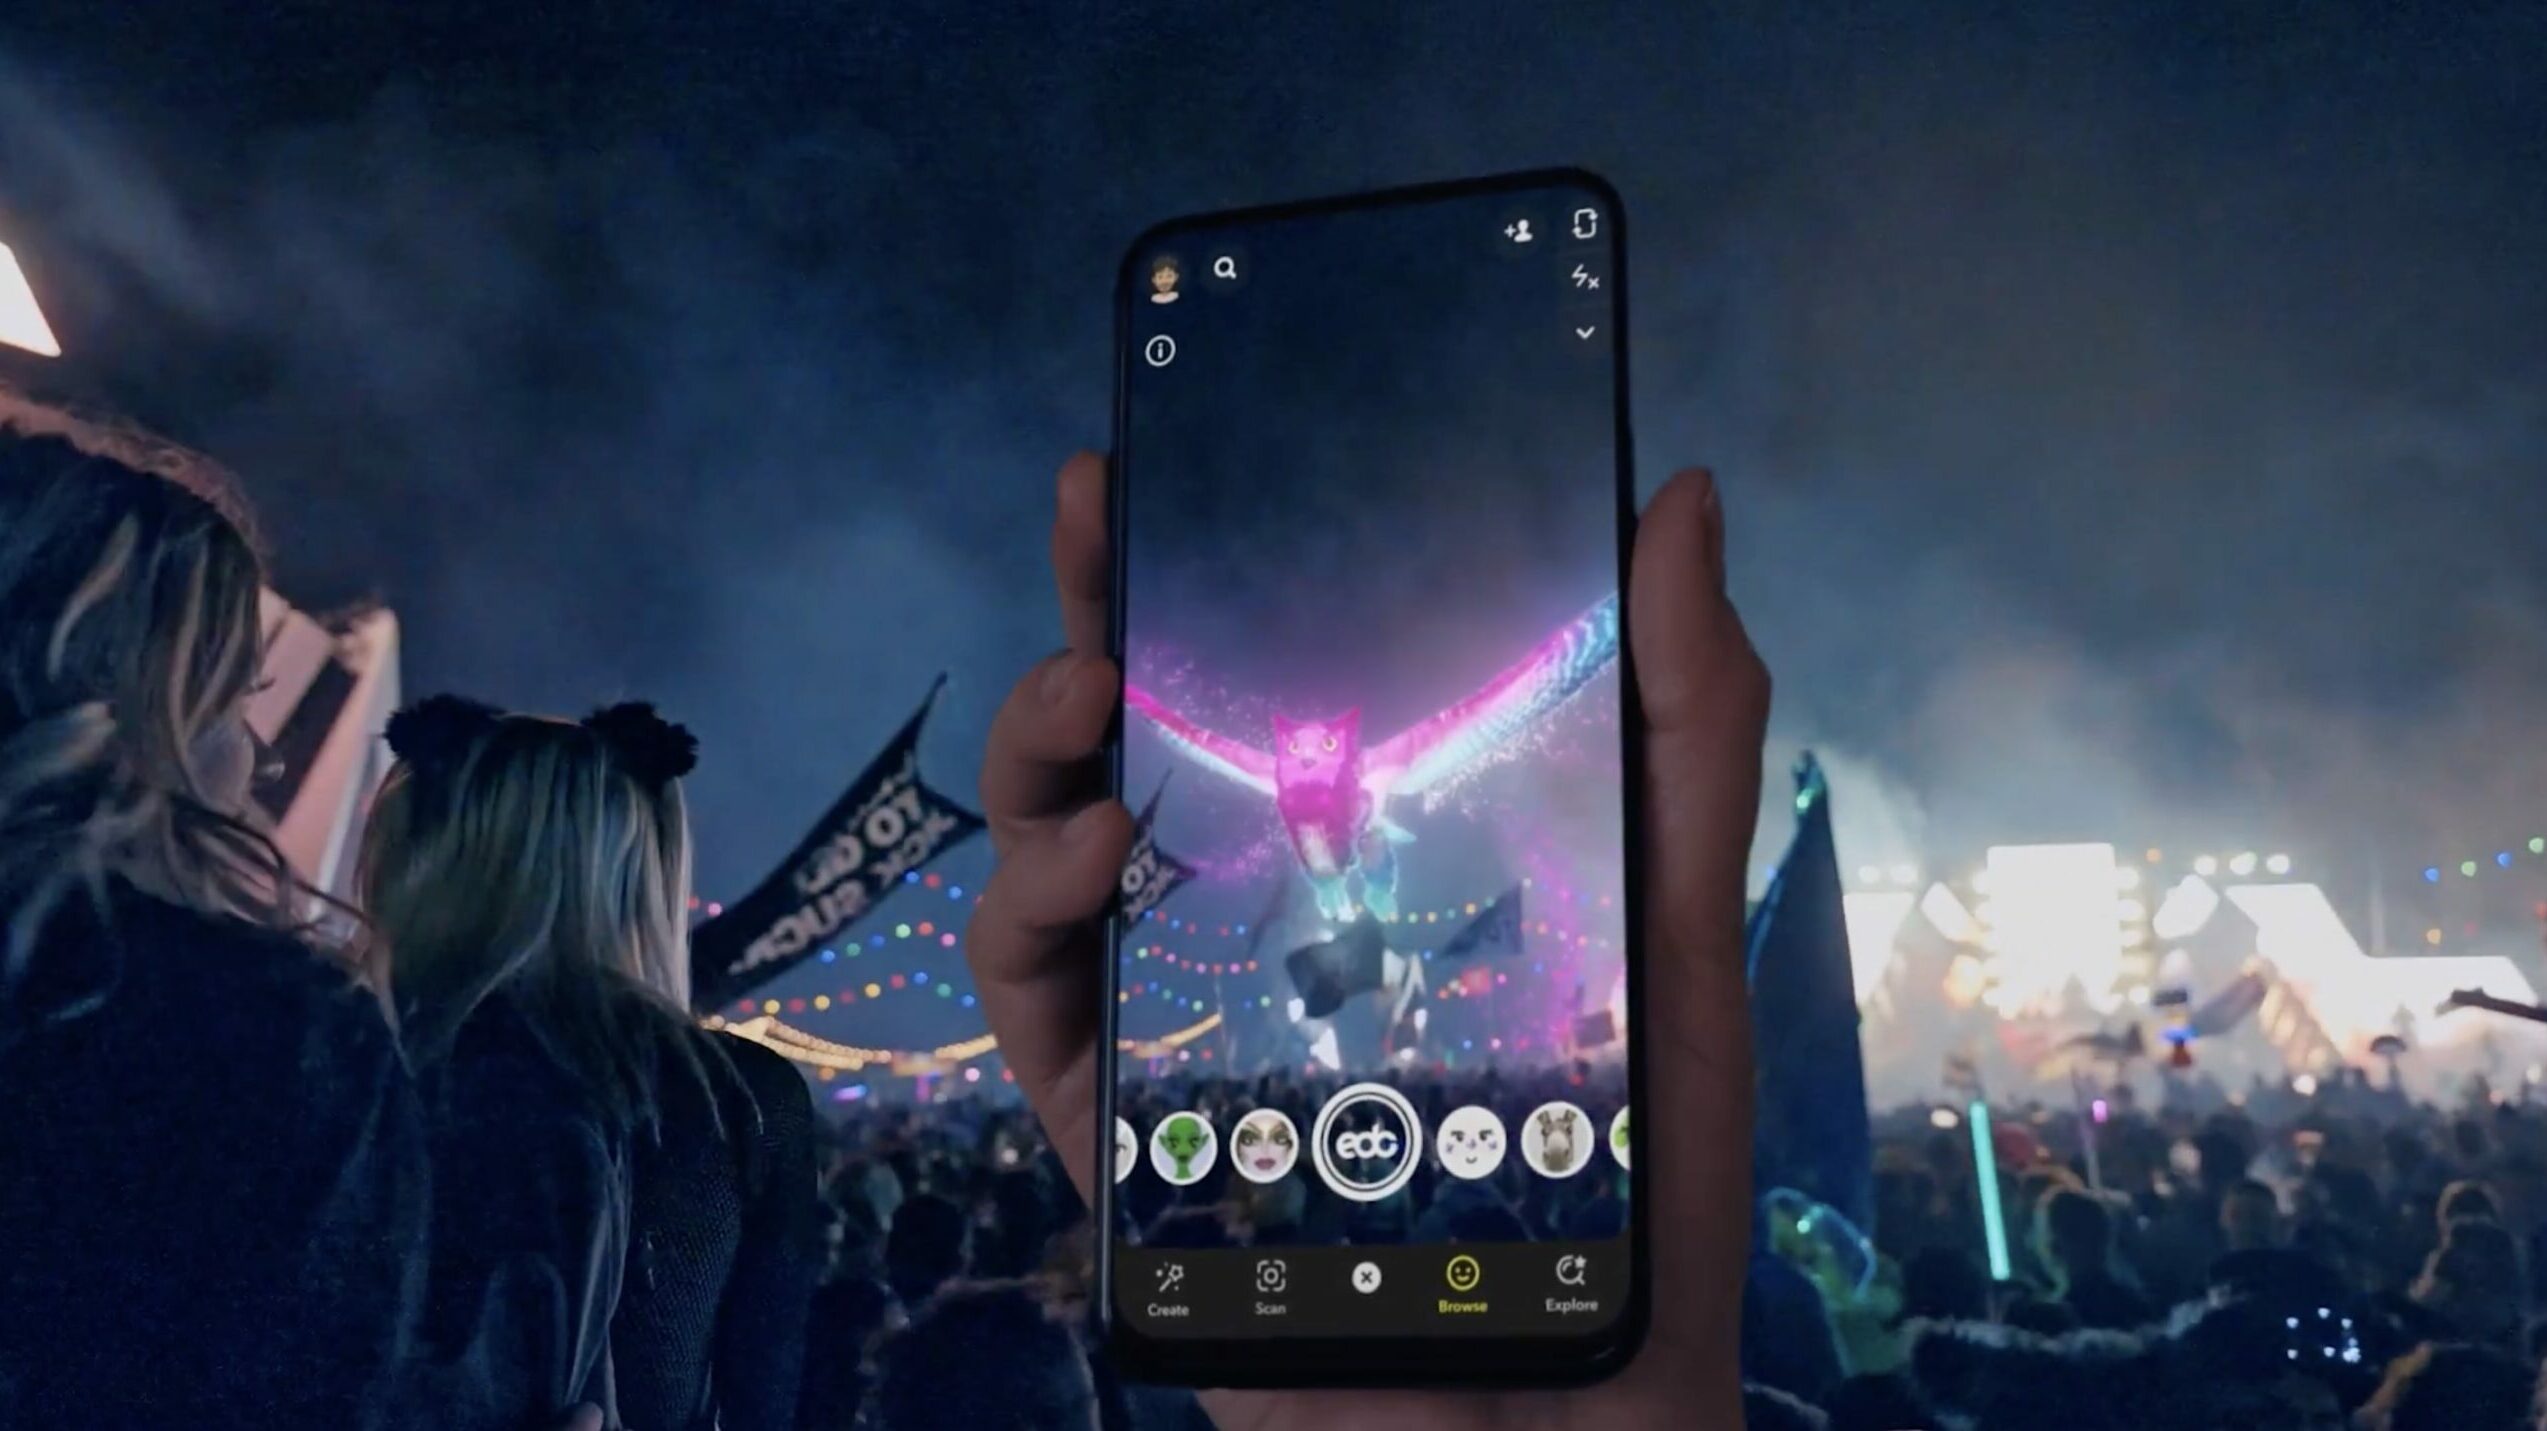 Snapchat, which now reaches over 600m monthly users, inks Augmented Reality partnership with Live Nation - Music Business Worldwide